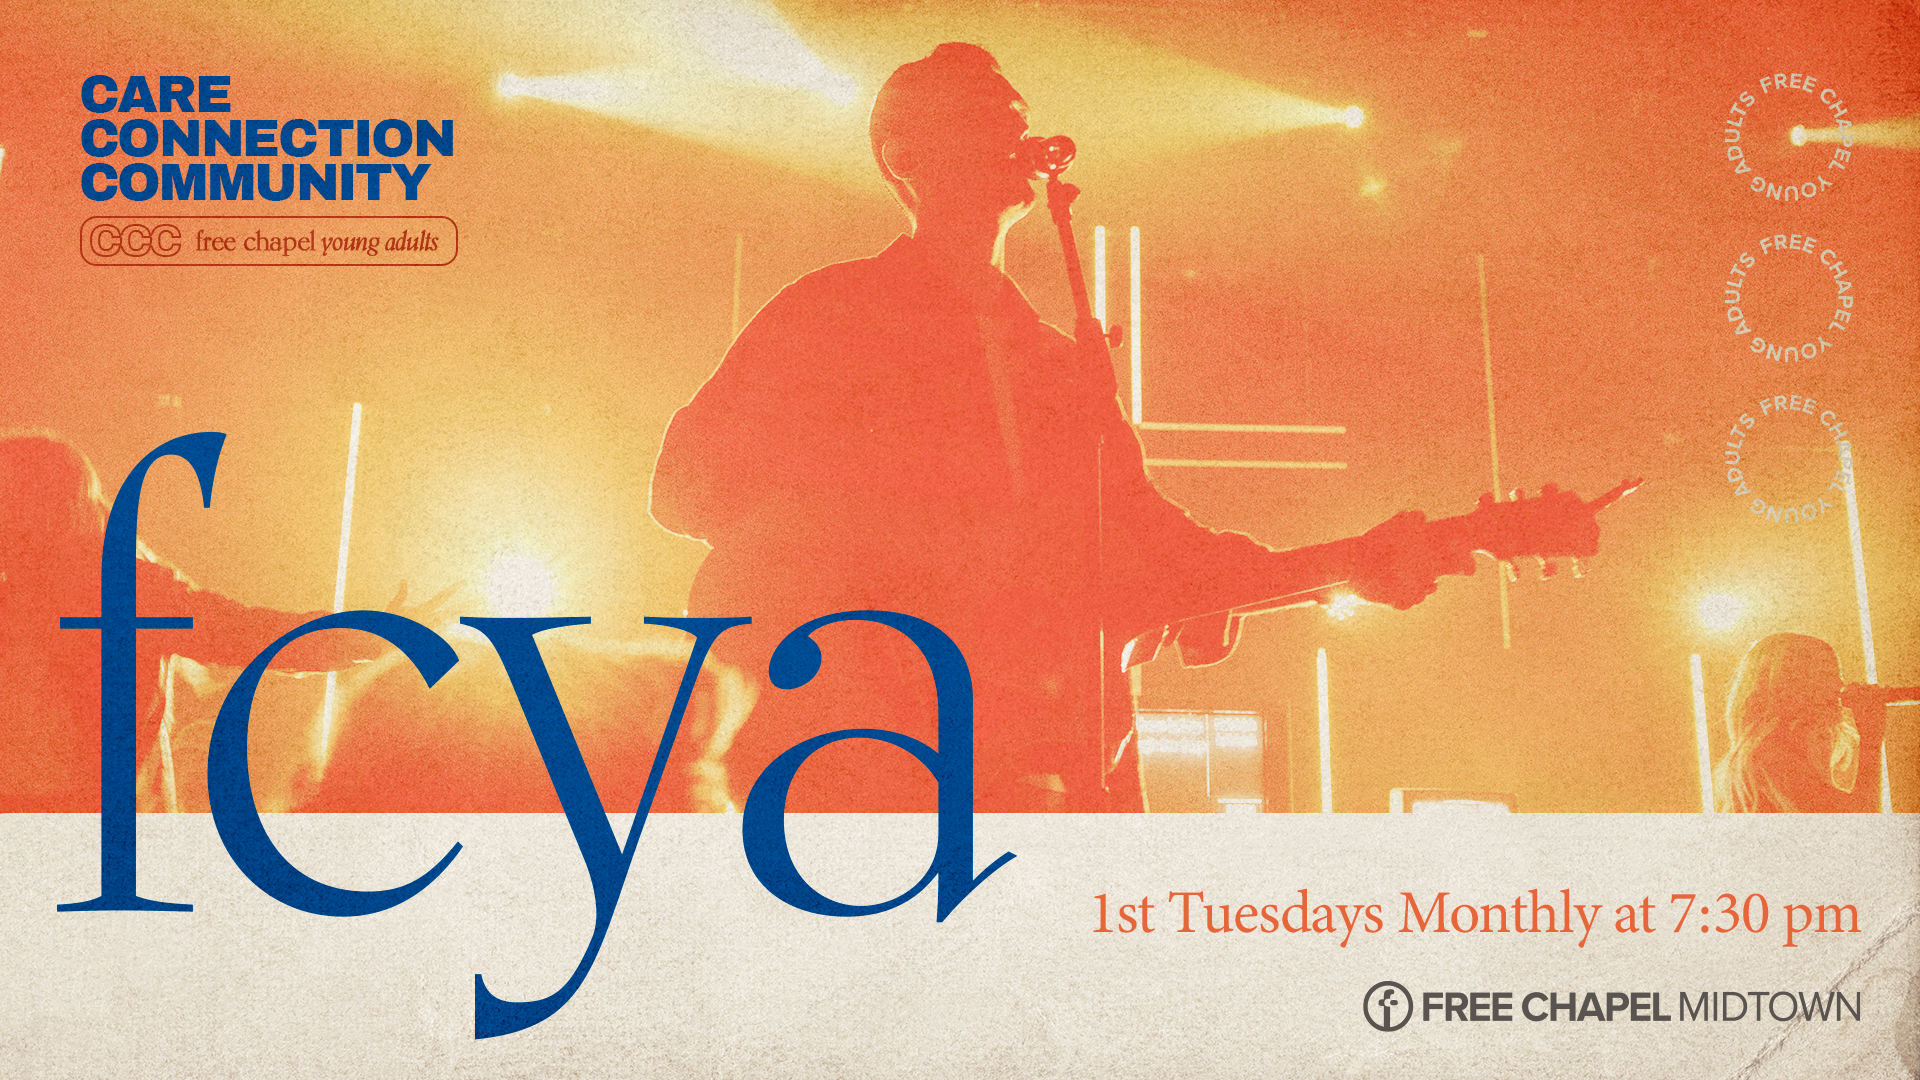 FCYA First Tuesday at the Midtown campus